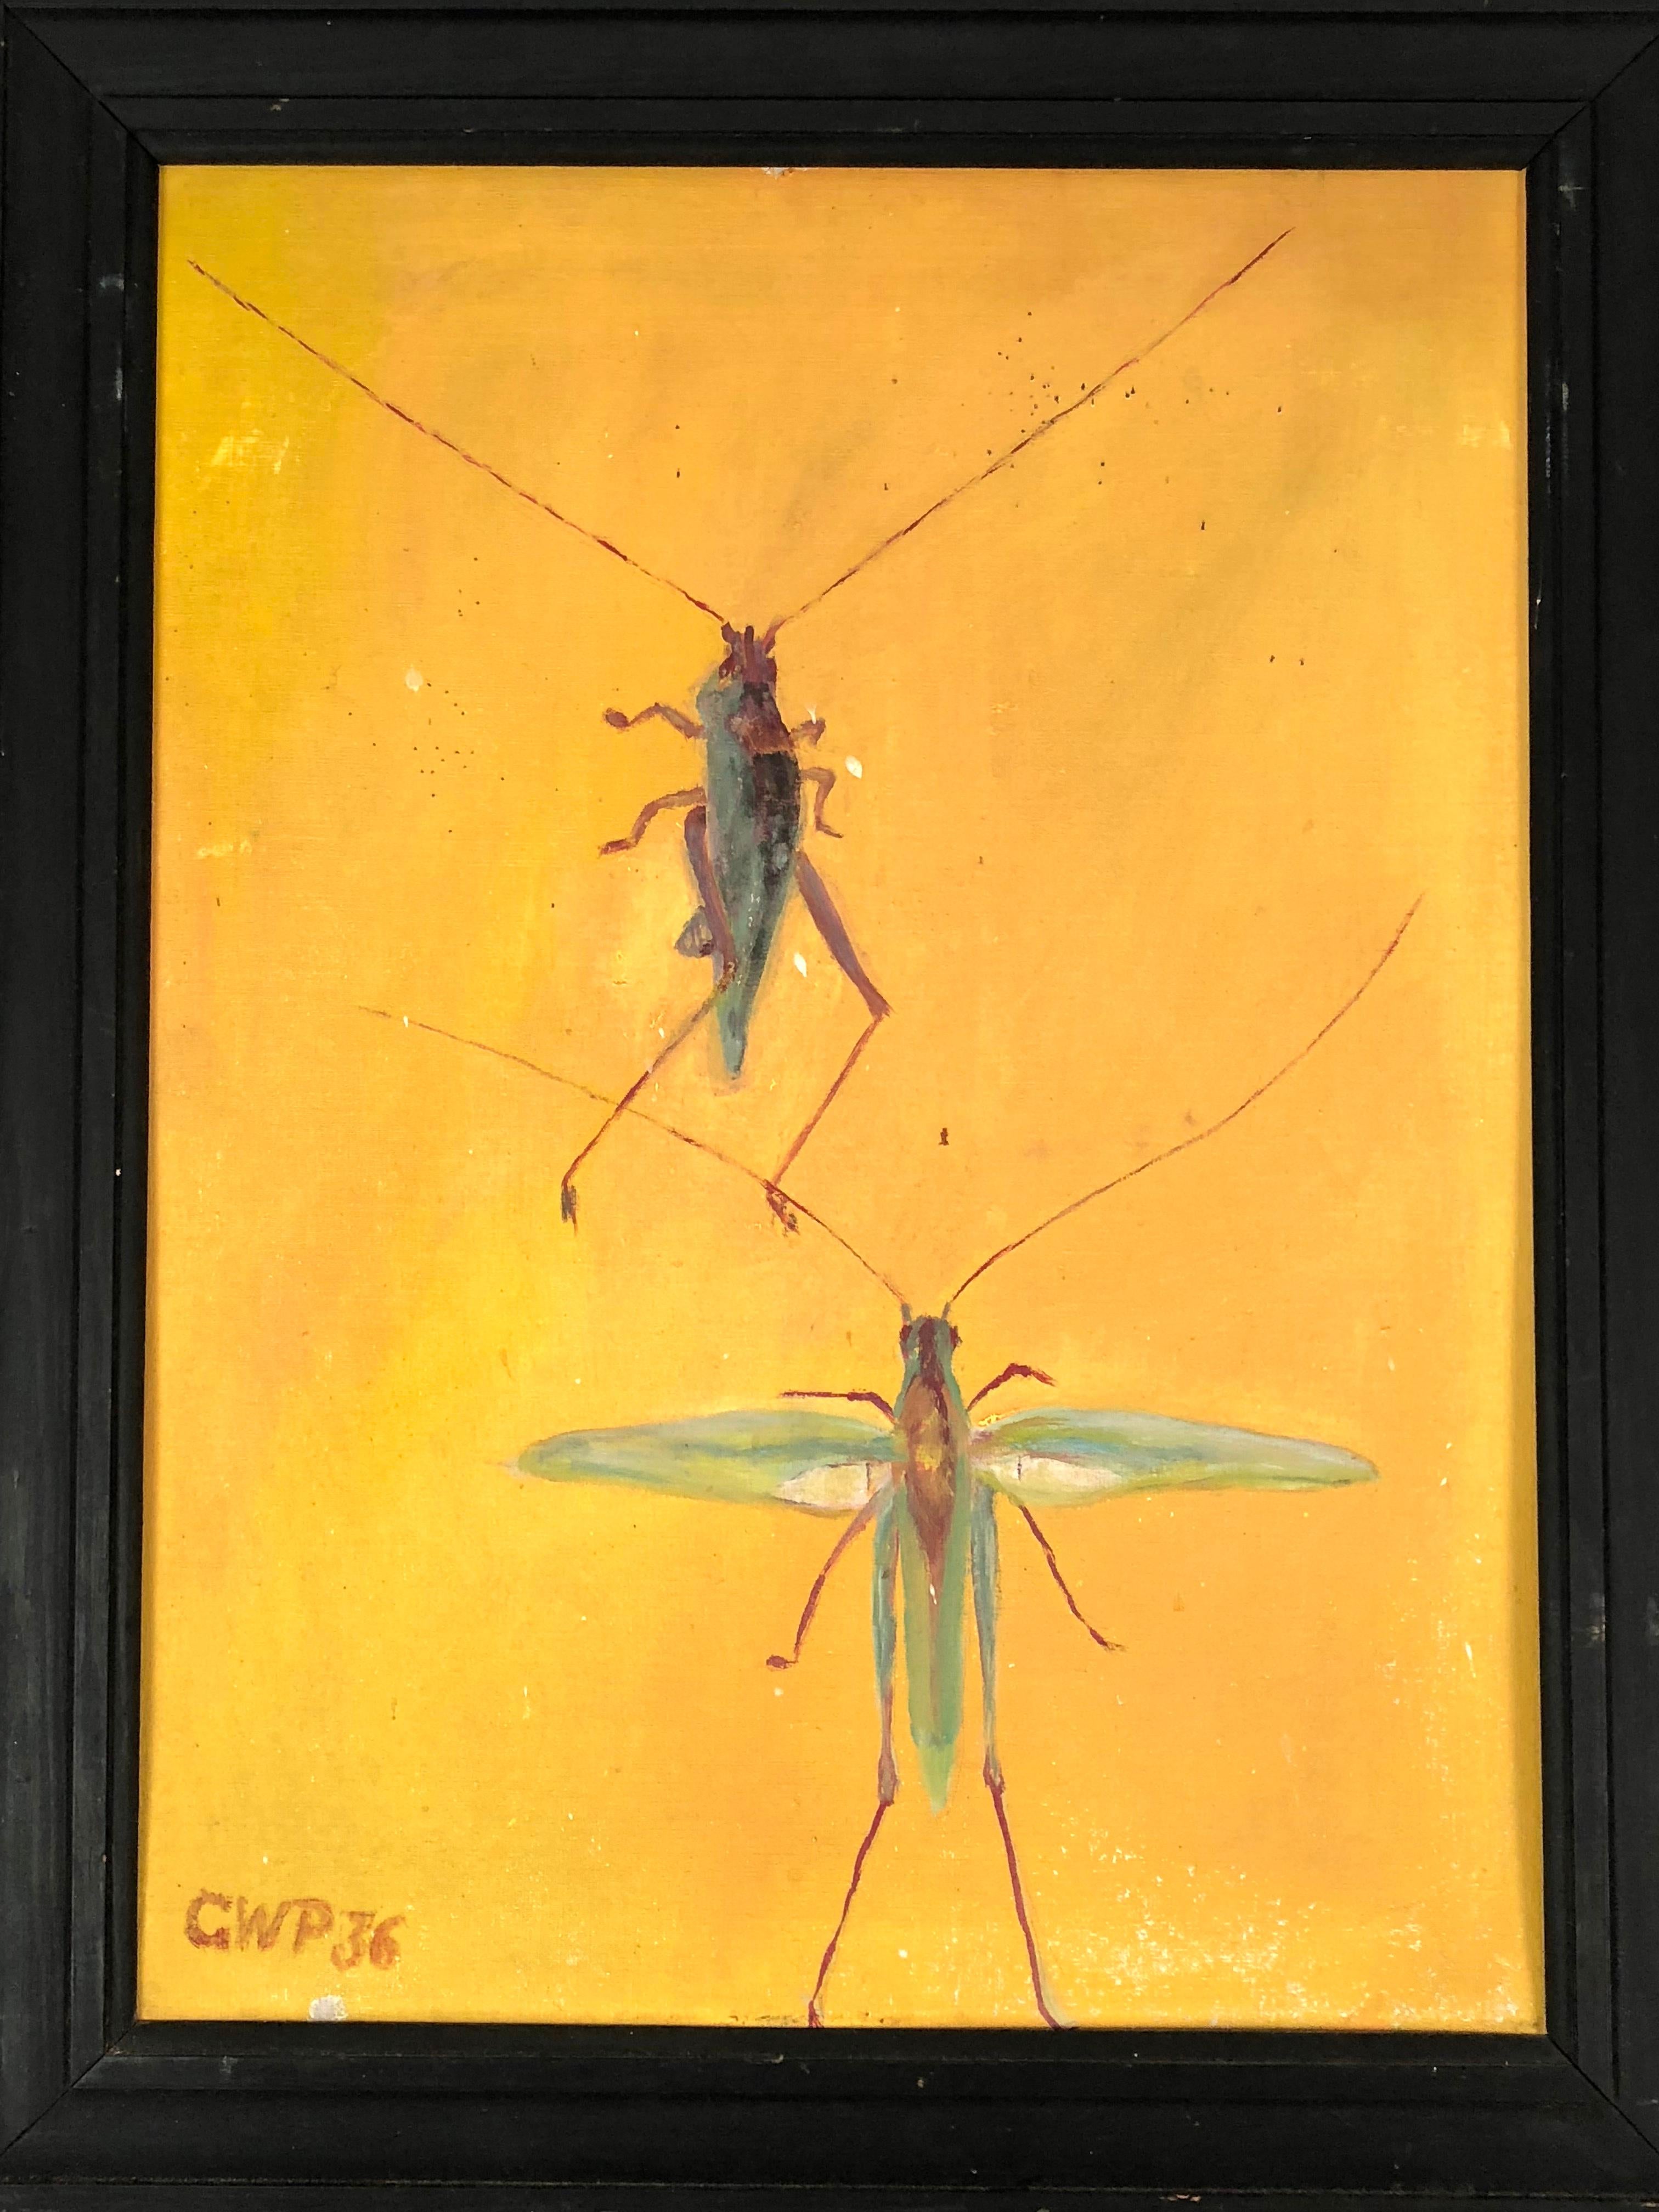 An unusual and decorative painting, oil on board, of two grasshoppers, or other long insects with long antennae, on a bright yellow background, signed and dated lower left GVP, George Pierce, 1936. In its original, old black painted frame.